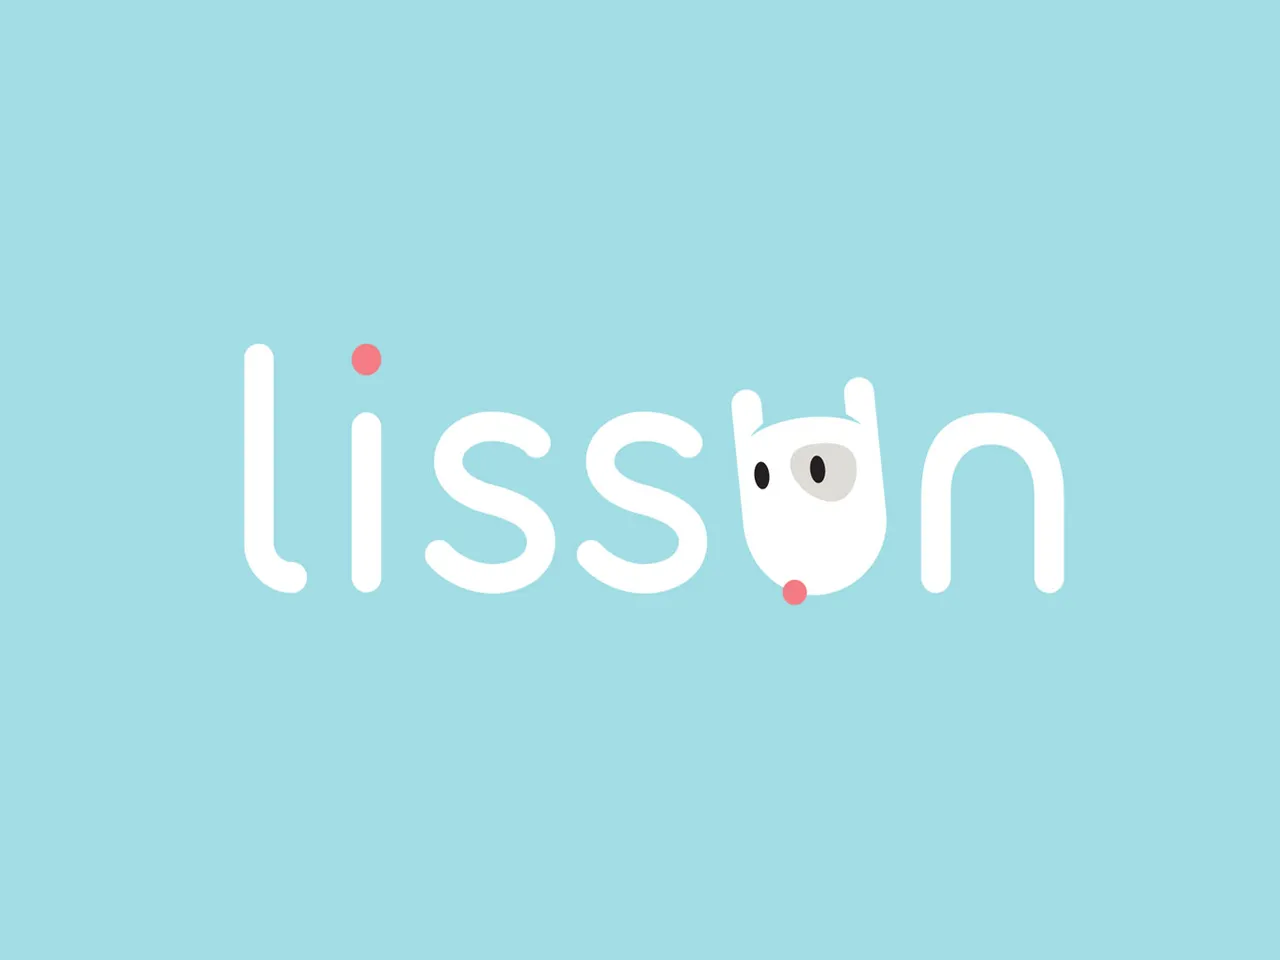 Mental wellness startup Lissun raises $1M led by IvyCap, others